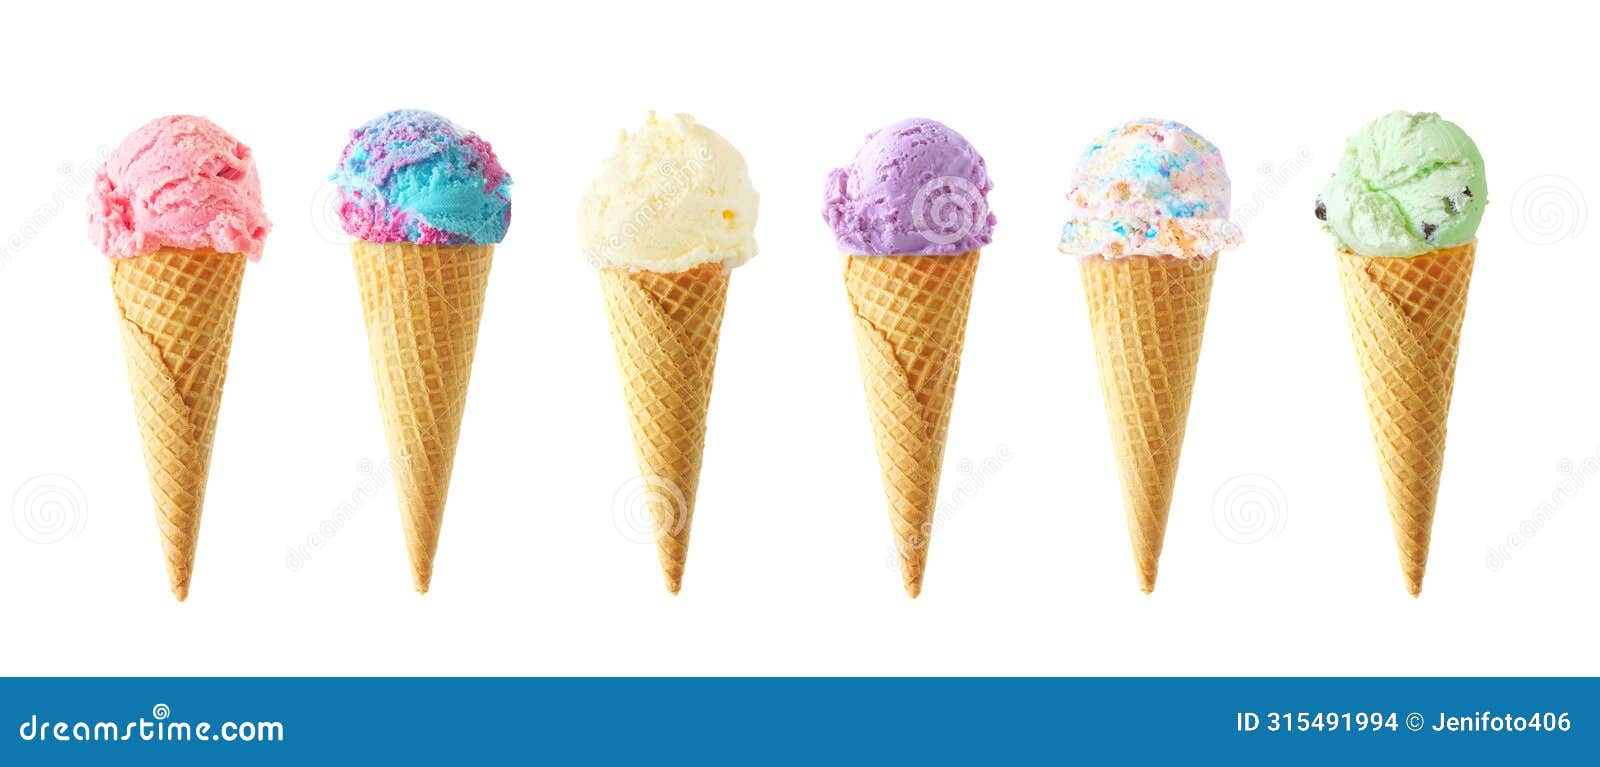 large assortment of ice cream cones  on a white background